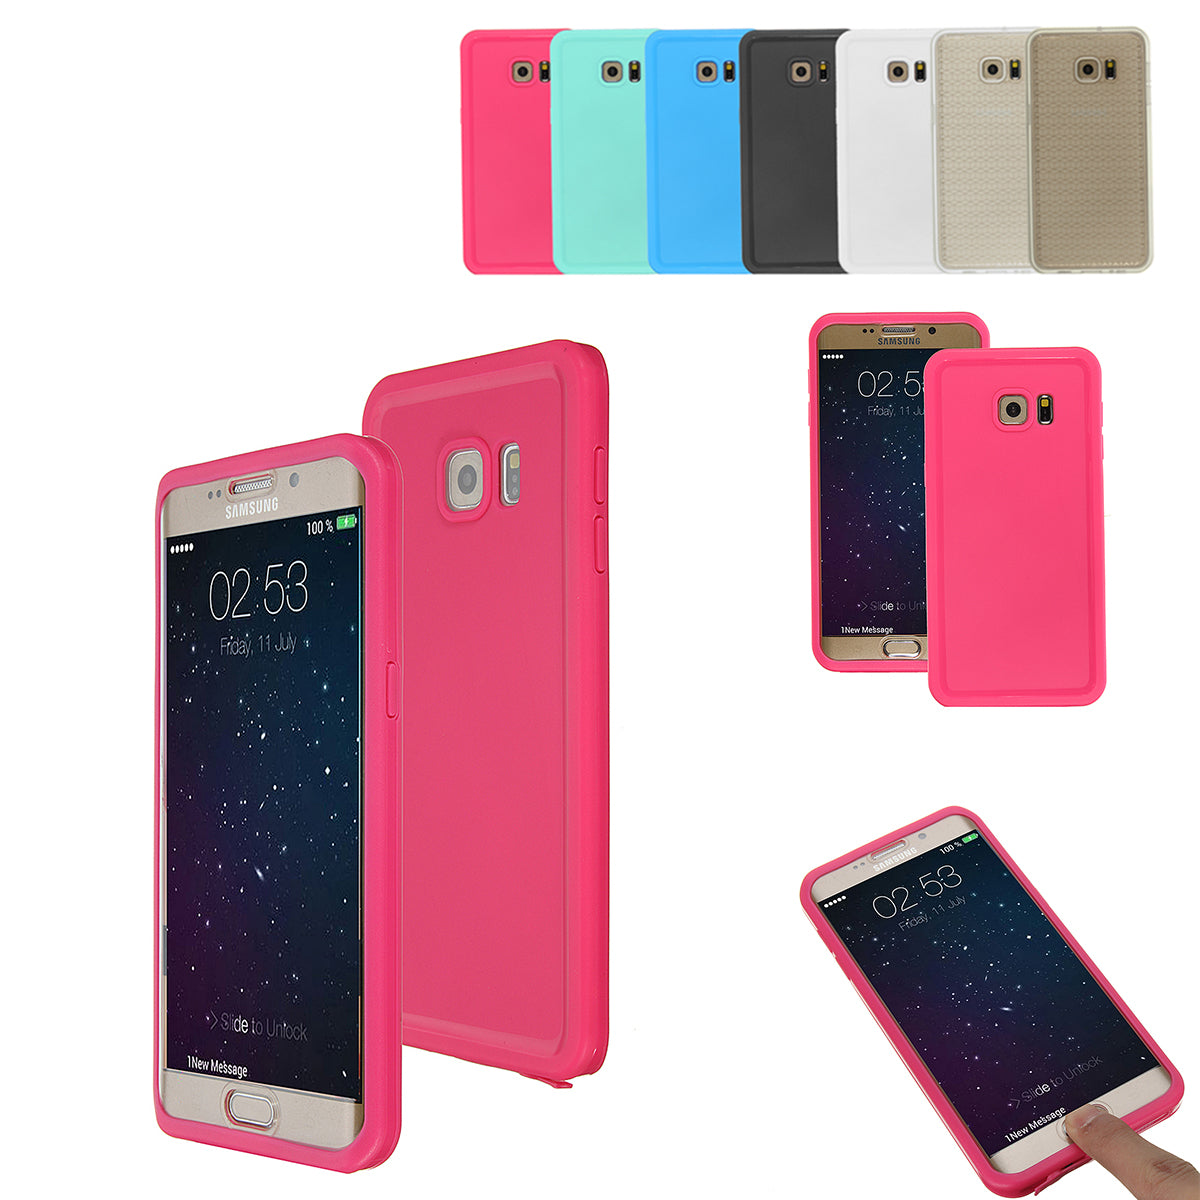 Genuine Waterproof Shockproof Dustproof Touch Screen TPU Case Cover For Samsung S6 Edge Plus